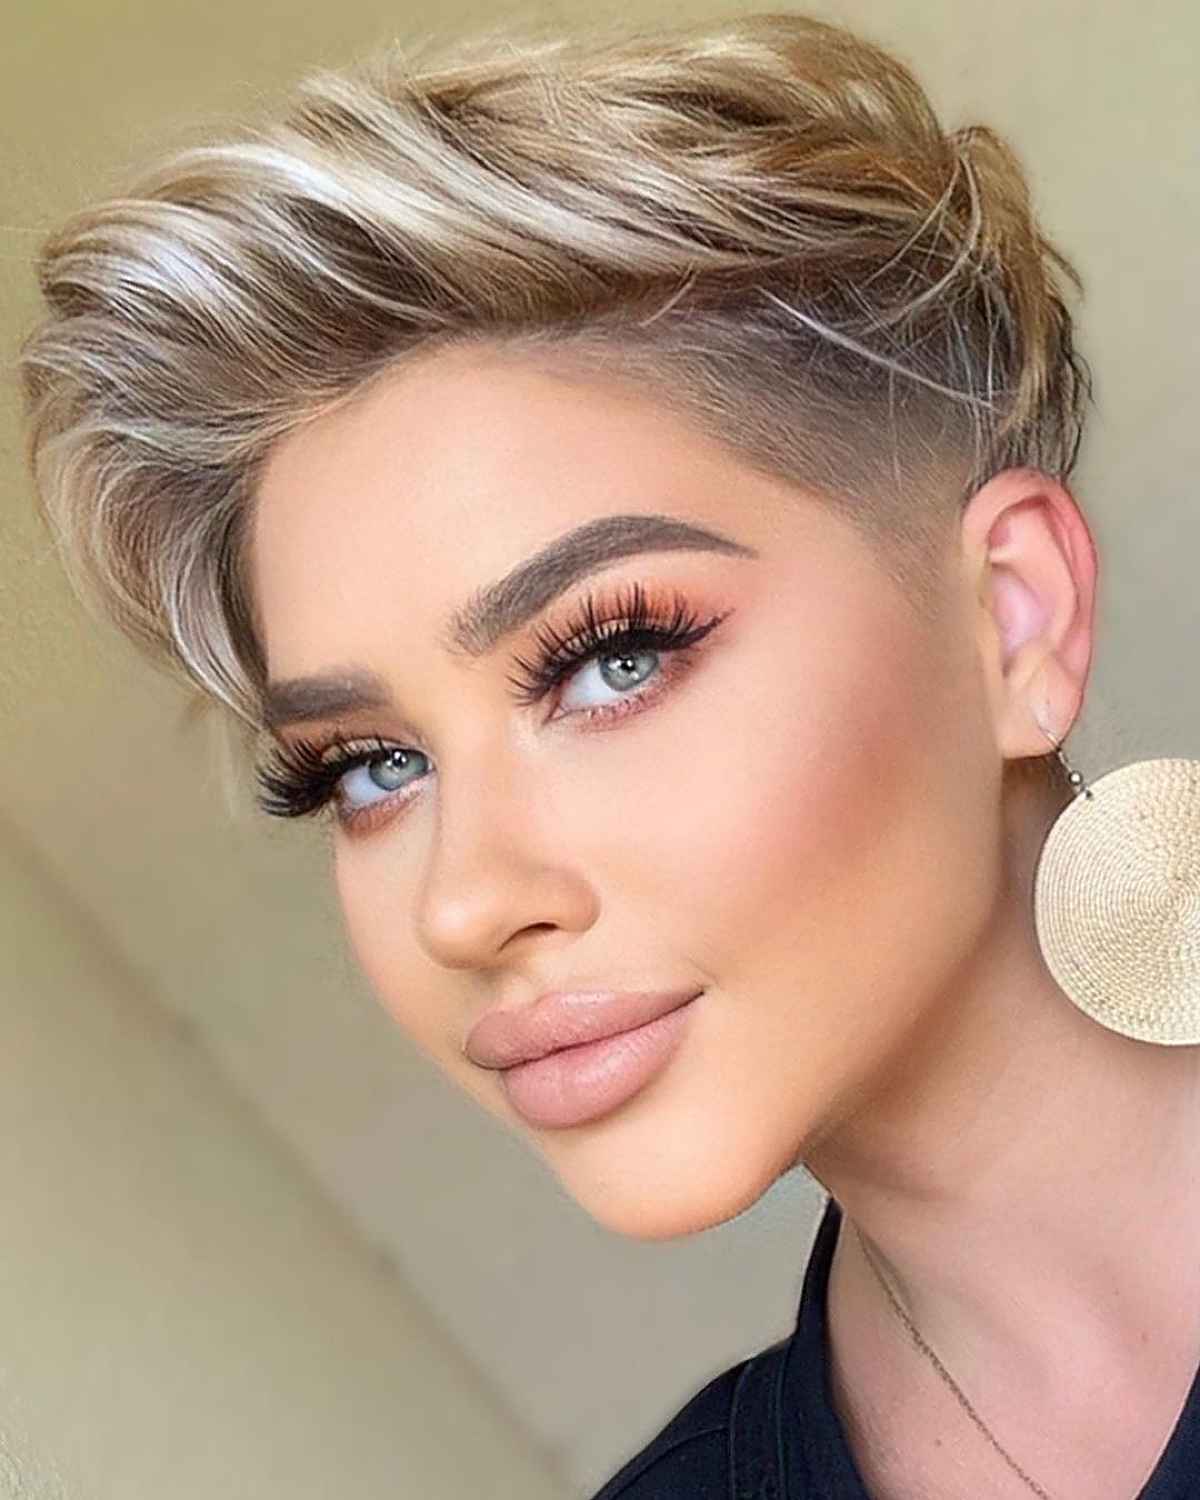 29 Low-Maintenance Short Haircuts for a Trendy, Yet Time-Saving Look